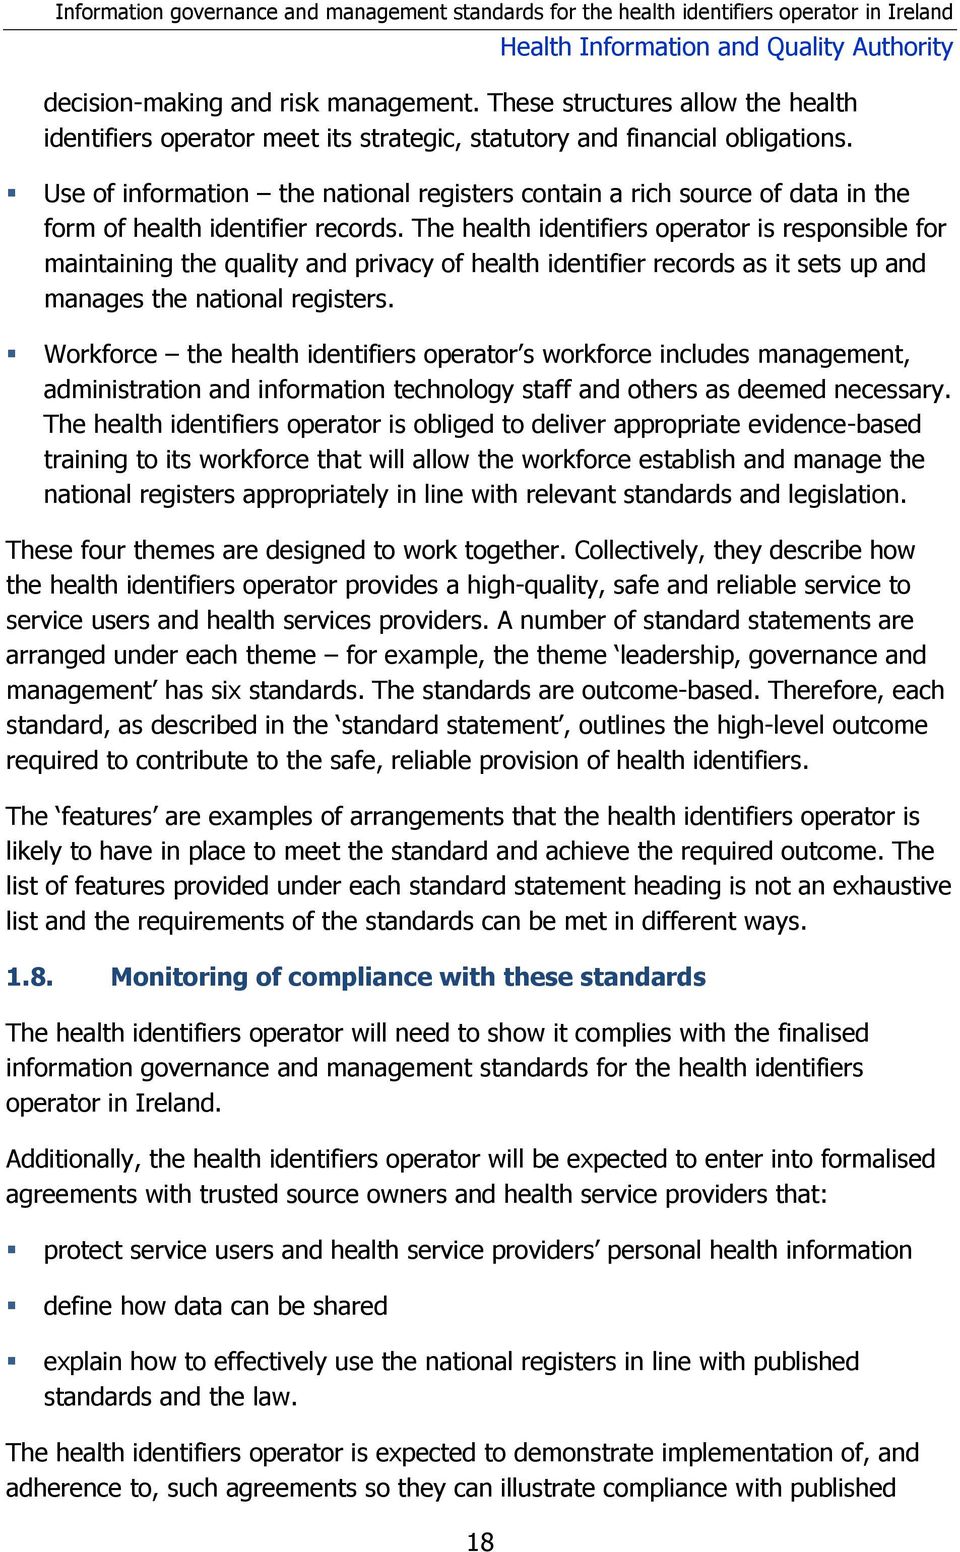 The health identifiers operator is responsible for maintaining the quality and privacy of health identifier records as it sets up and manages the national registers.